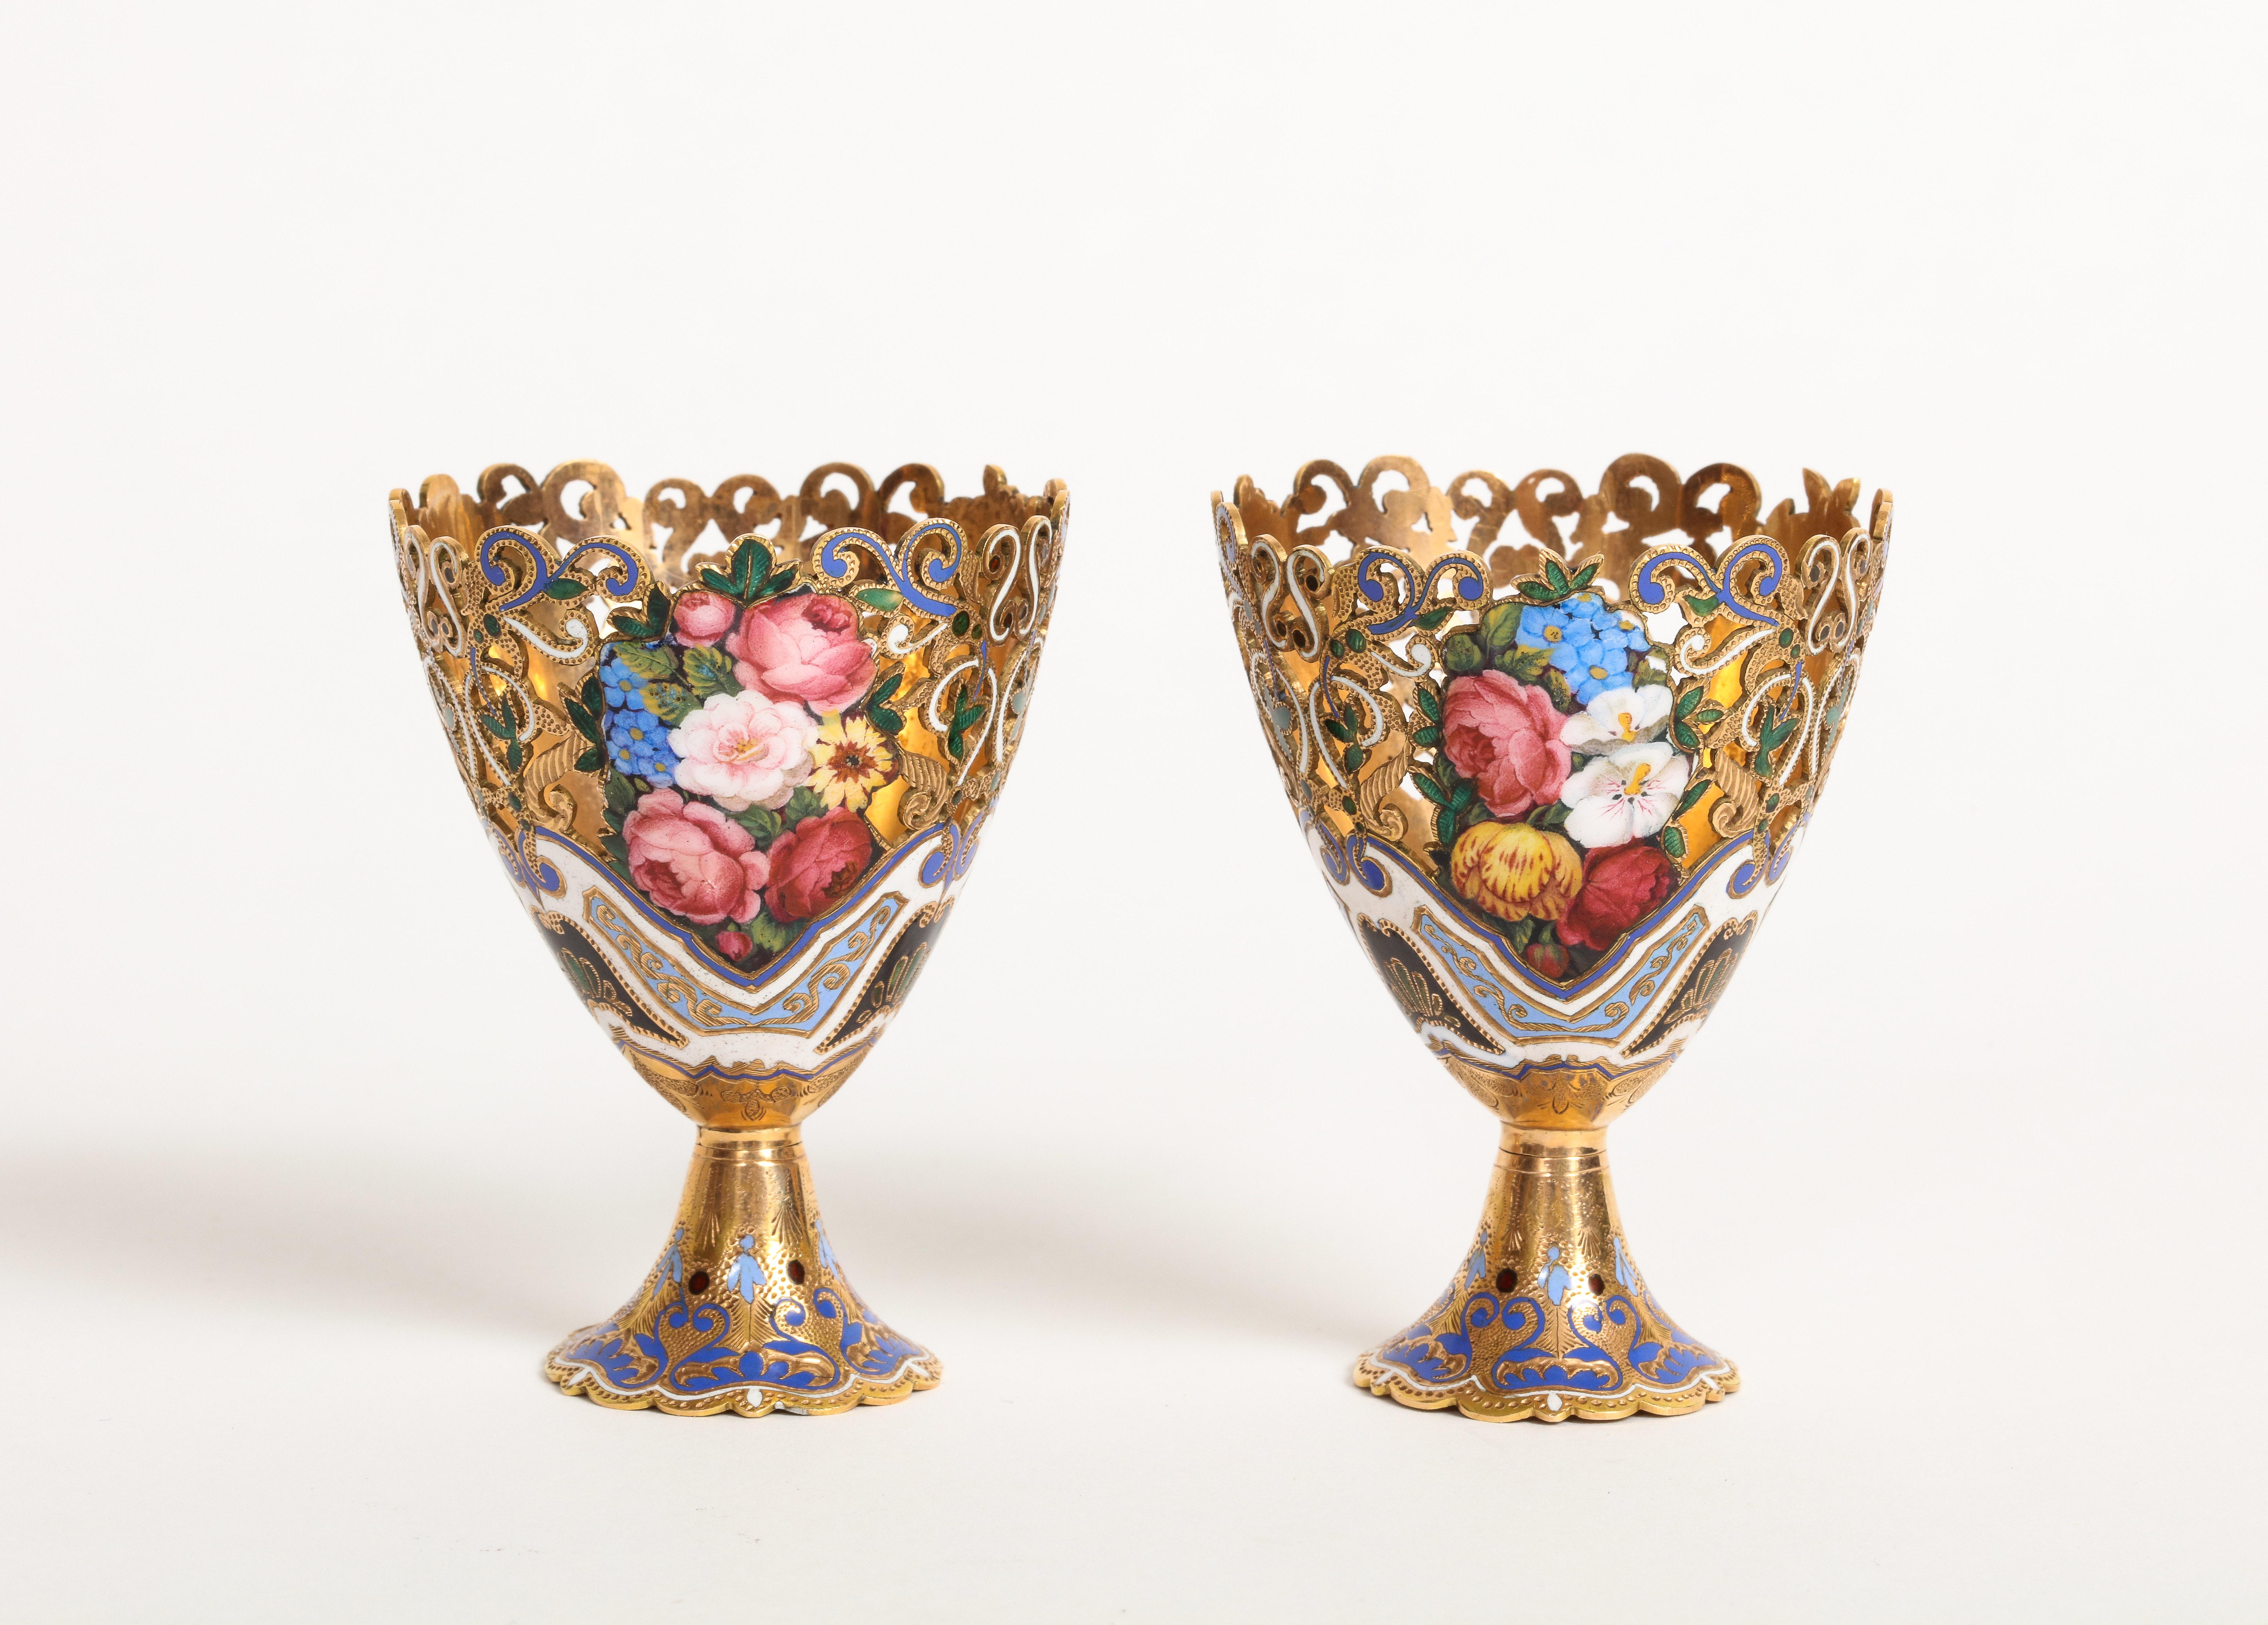 Enameled Museum Quality Pair of Gold and Enamel Zarfs For Sale